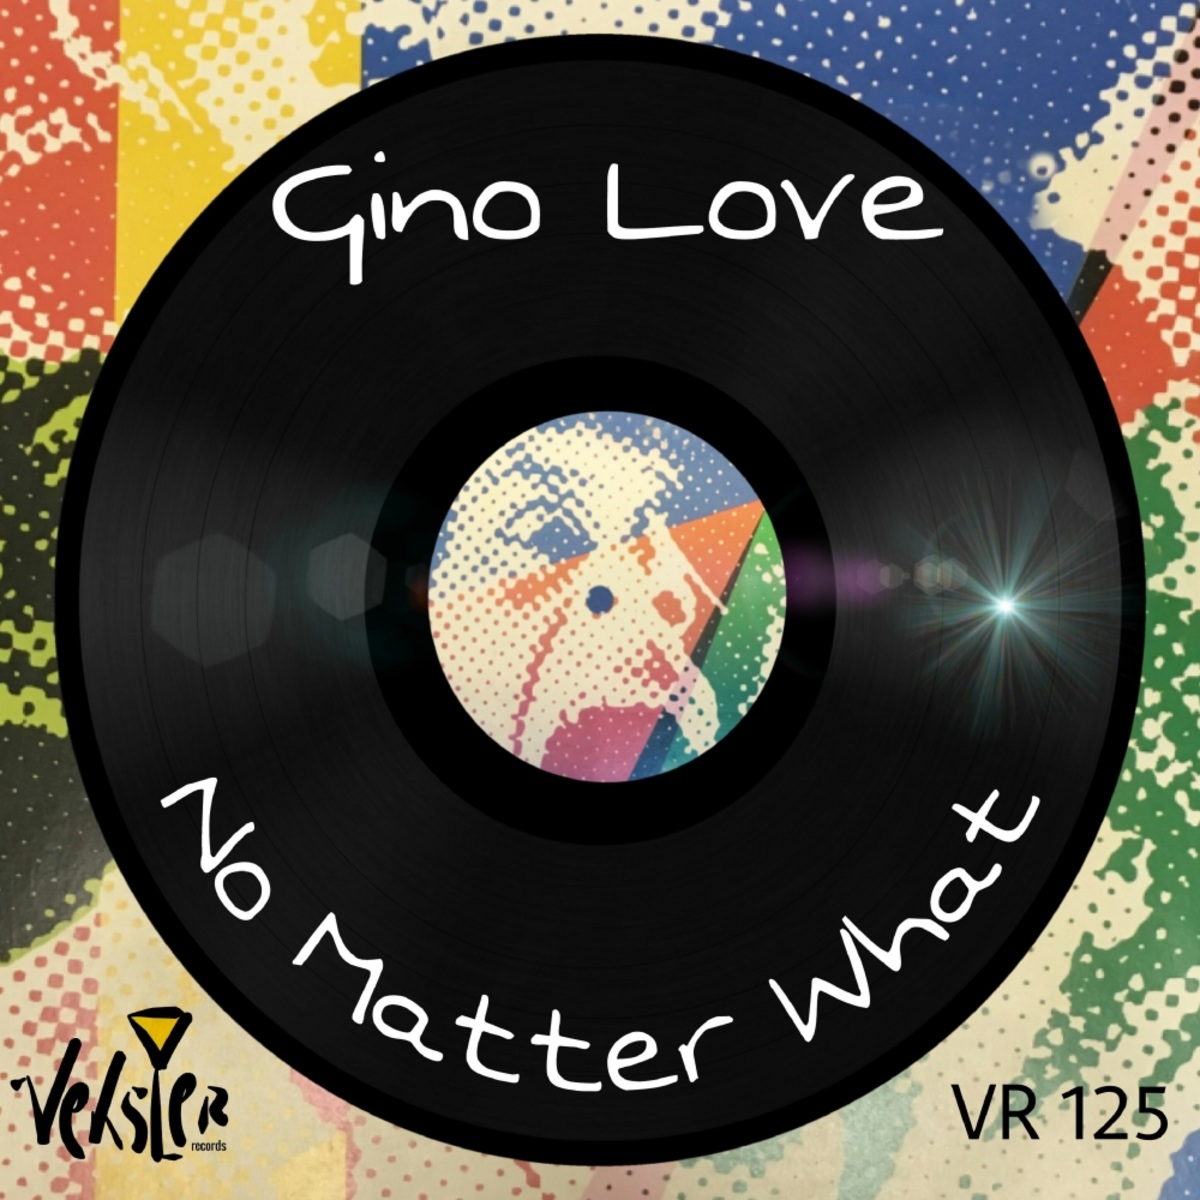 Gino Love - No Matter What / Veksler Records